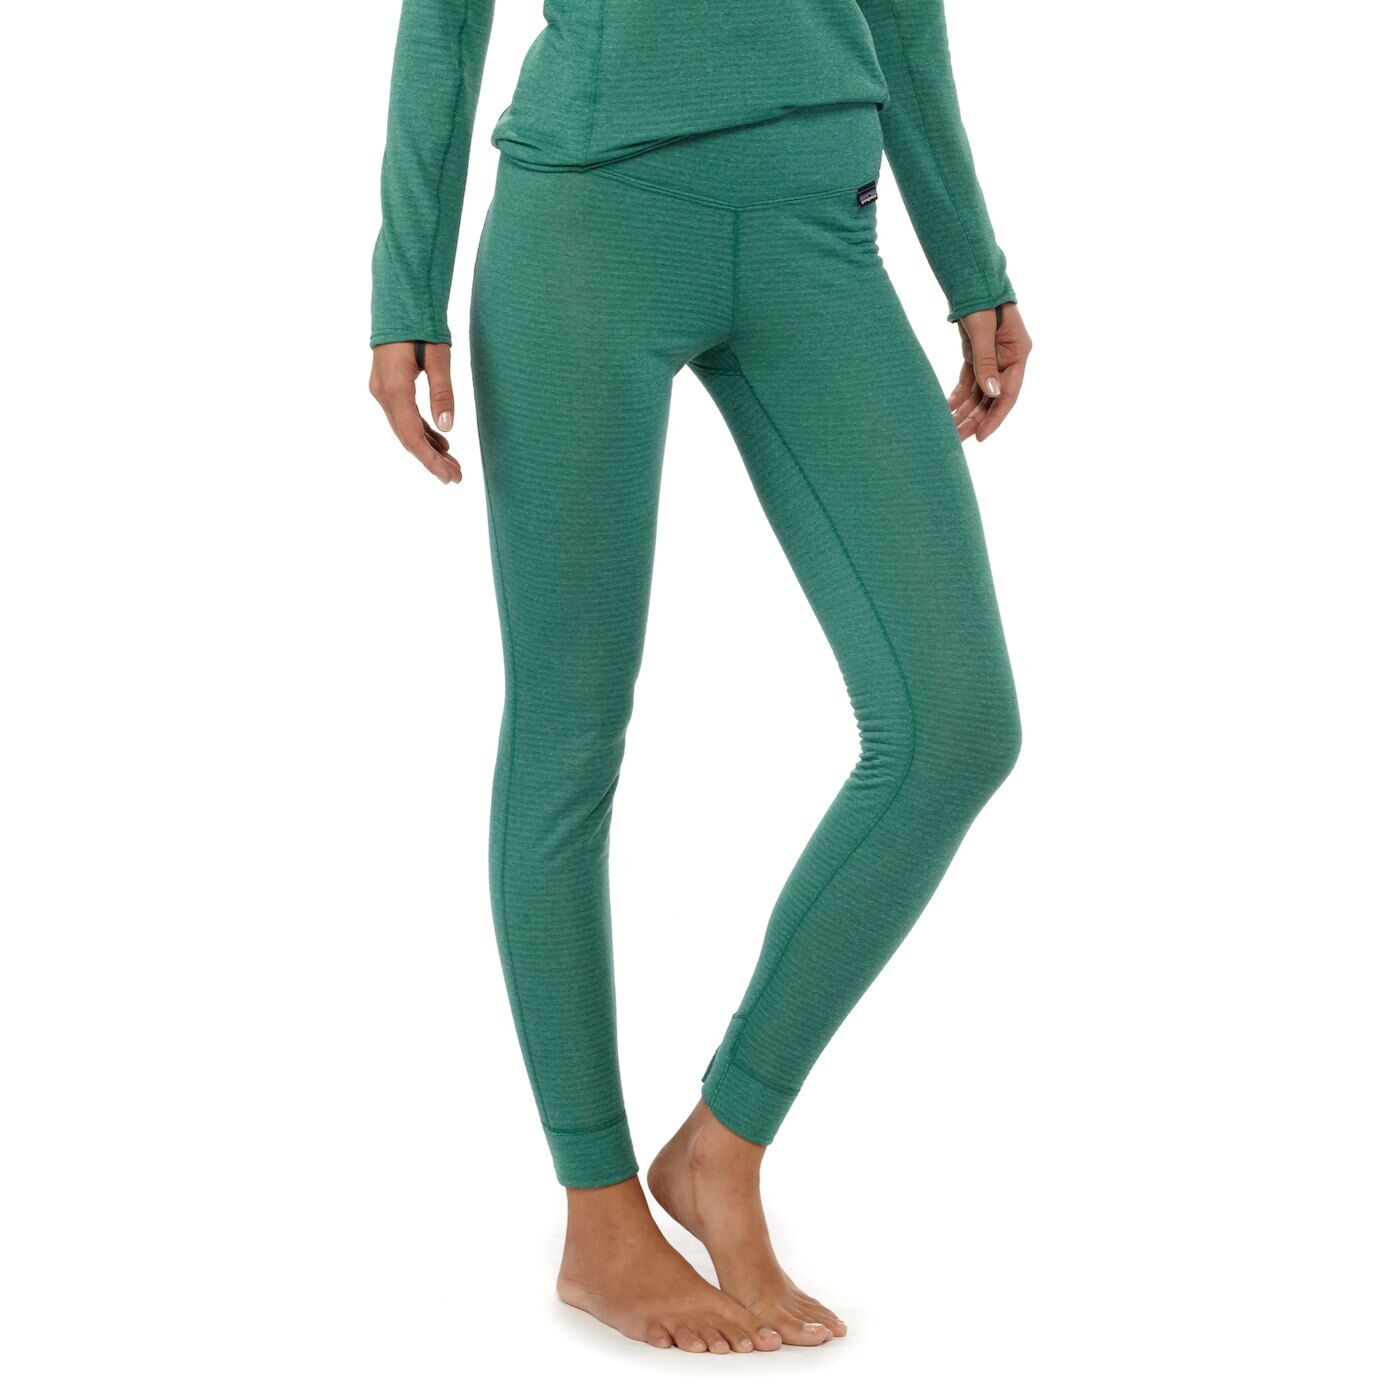 Patagonia - Capilene Thermal Weight Bottoms - Women's